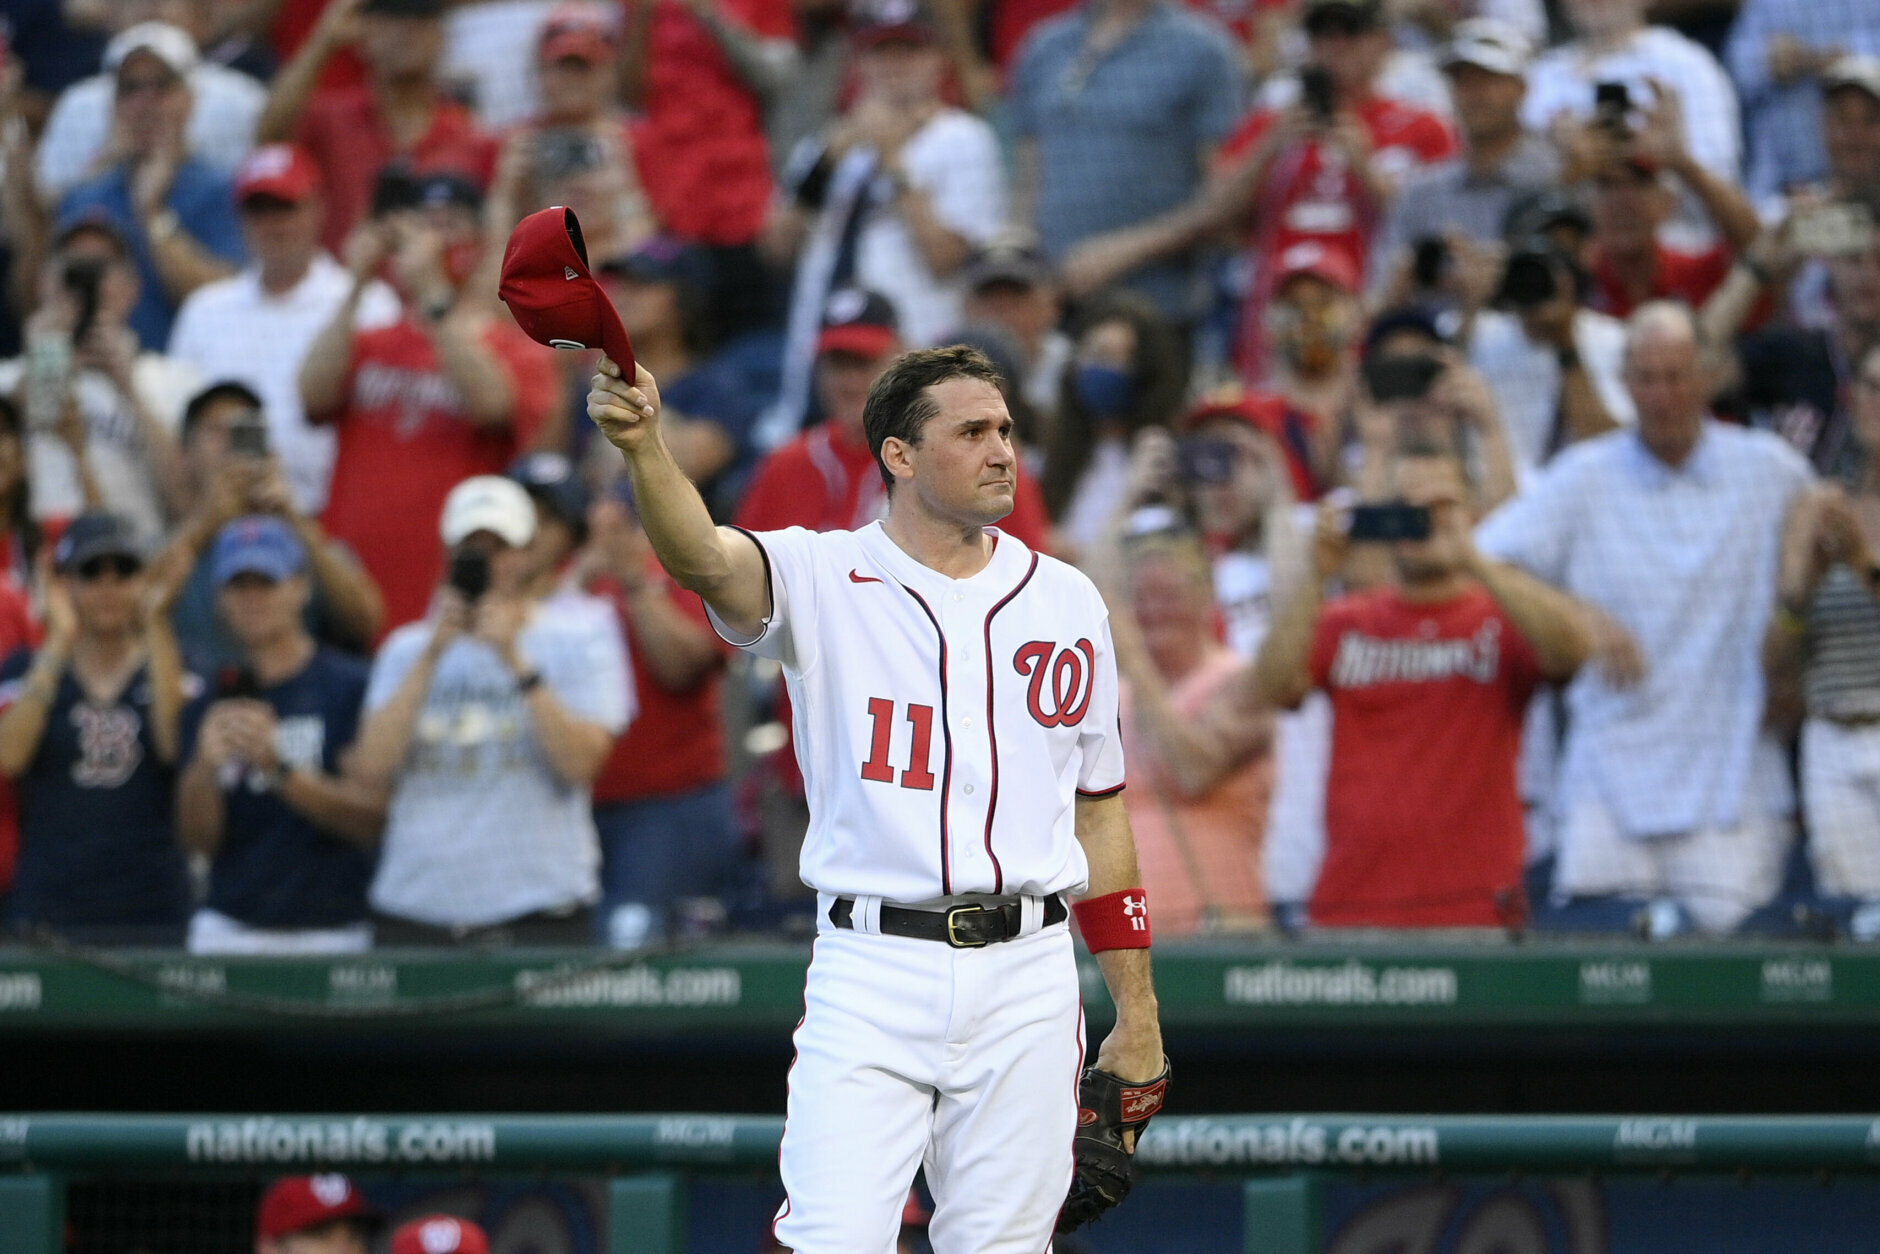 Washington Nationals' Ryan Zimmerman doffs his cap to the crowd after he came out of the game before the eighth inning of a baseball game against the Boston Red Sox, Sunday, Oct. 3, 2021, in Washington. The Red Sox won 7-5. (AP Photo/Nick Wass)